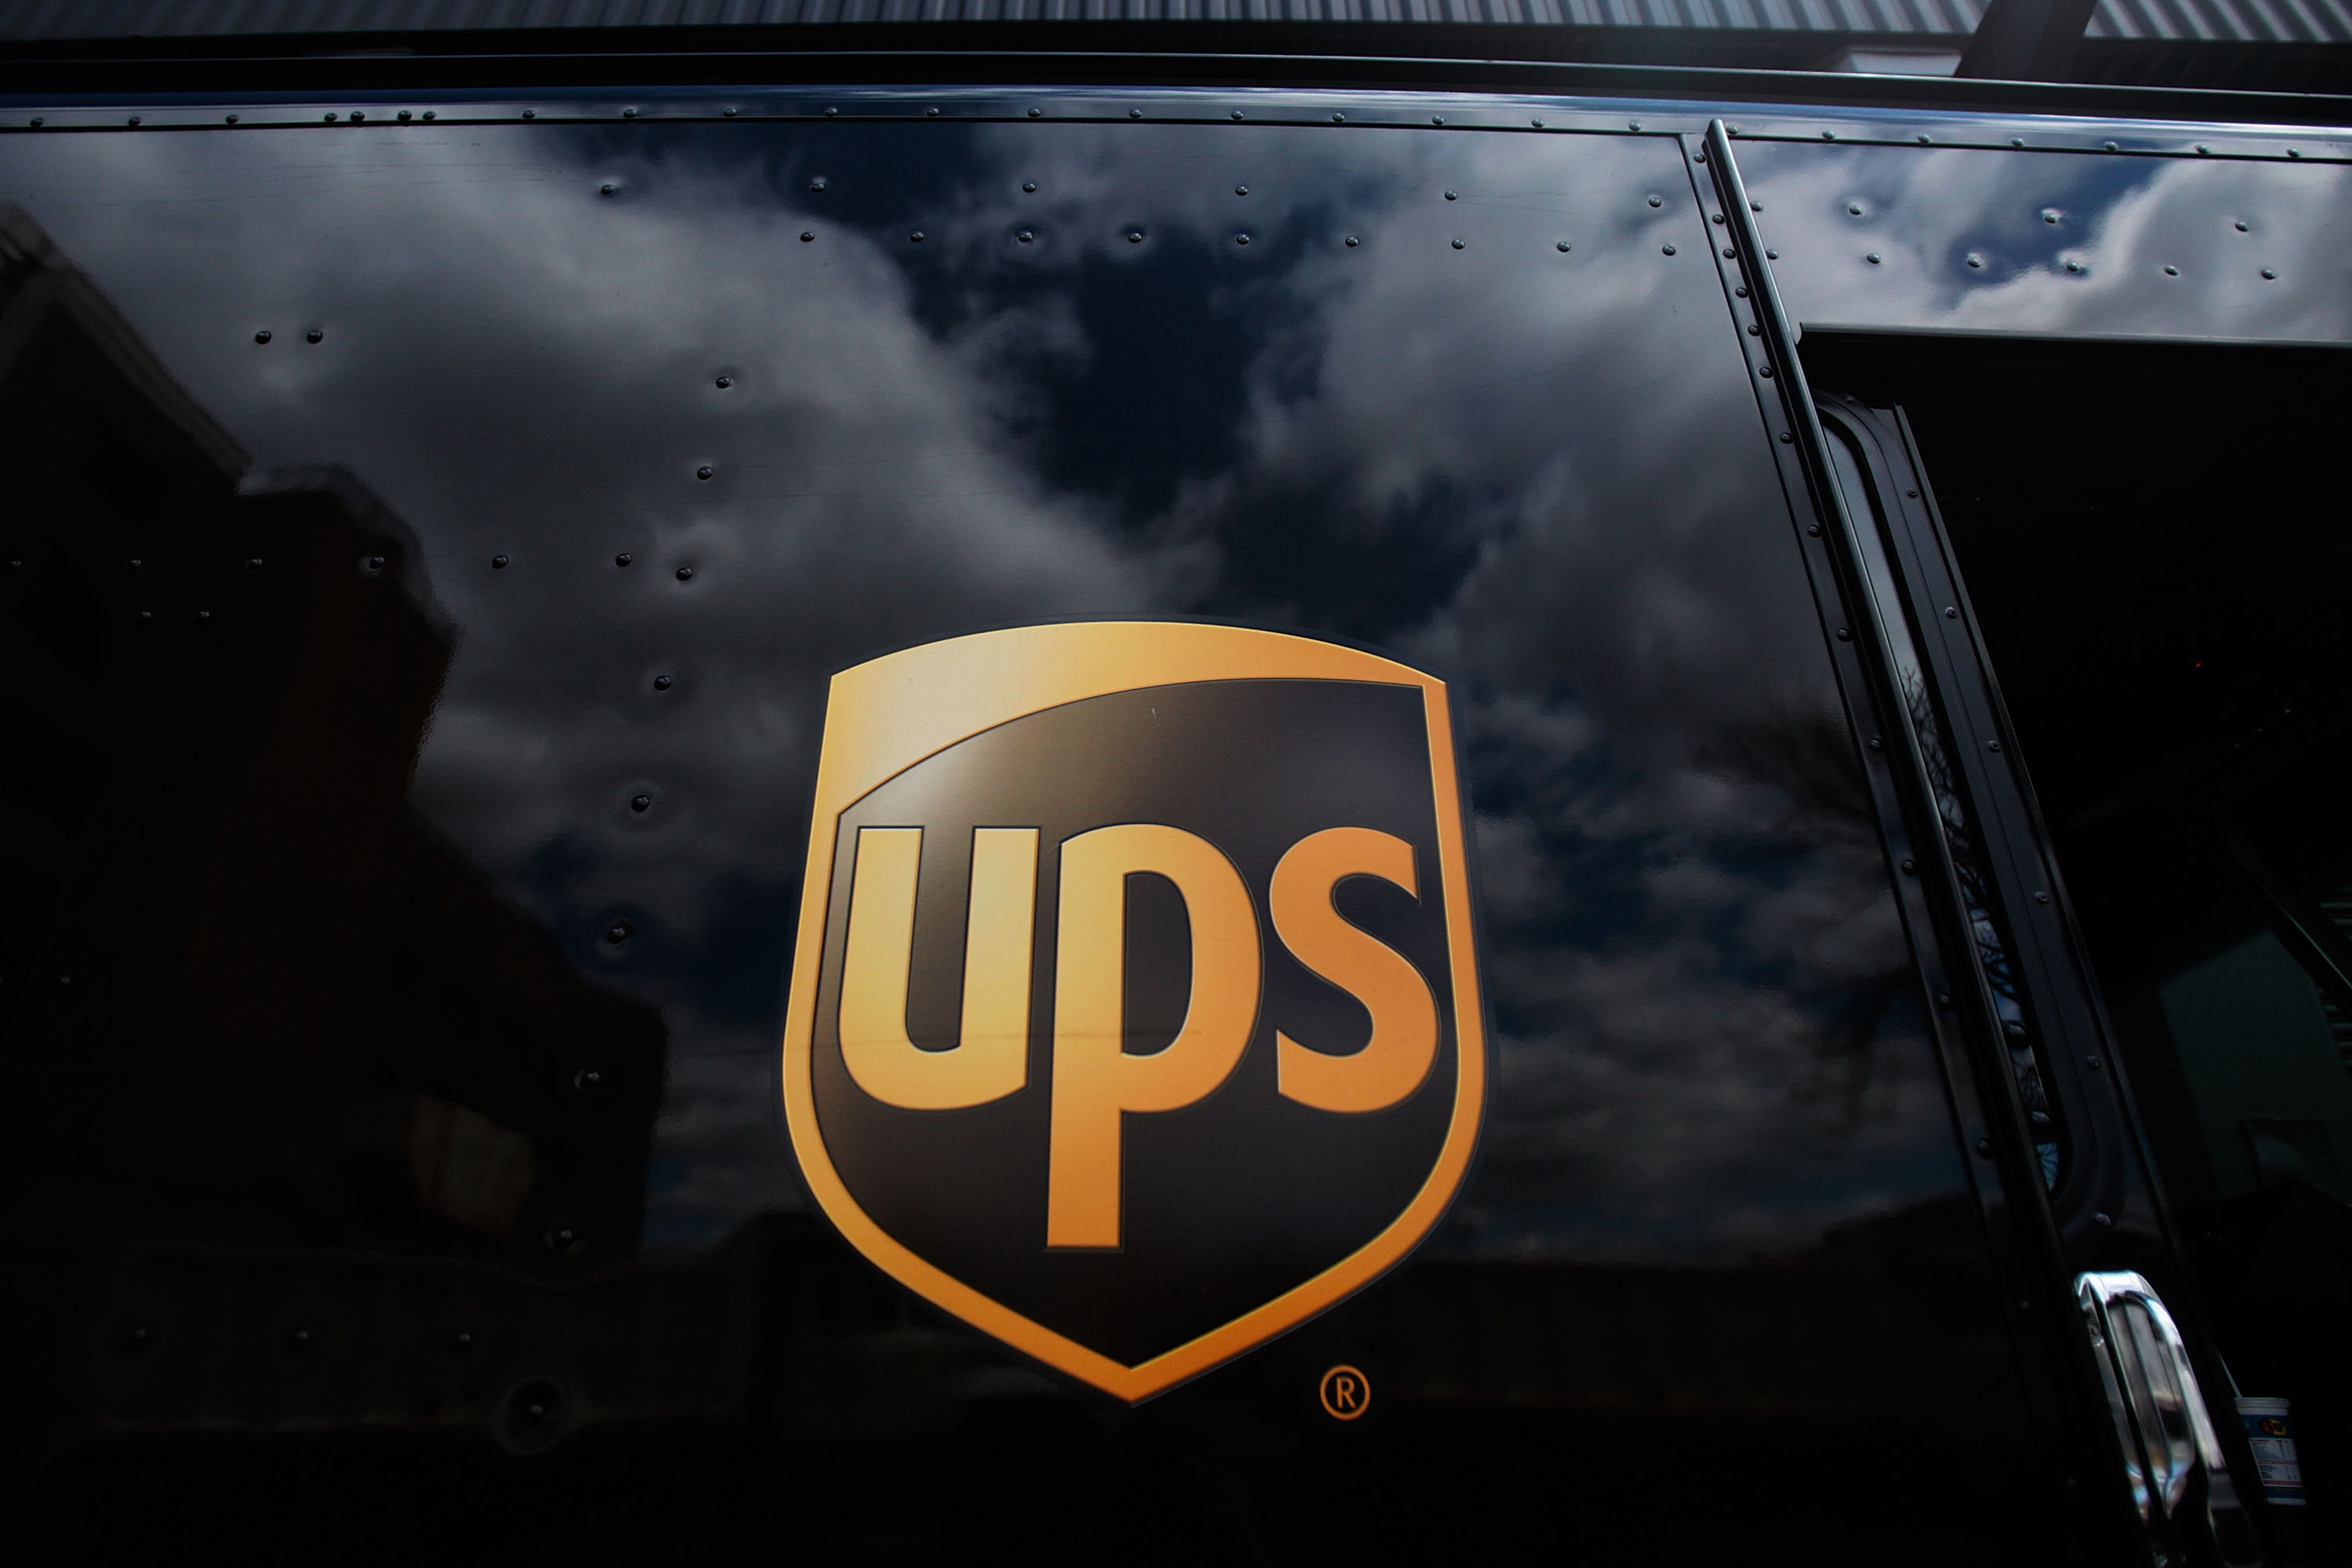 The United Parcel Service logo on the side of a delivery truck on April 23, 2009 in New York City. (Chris Hondros—Getty Images)